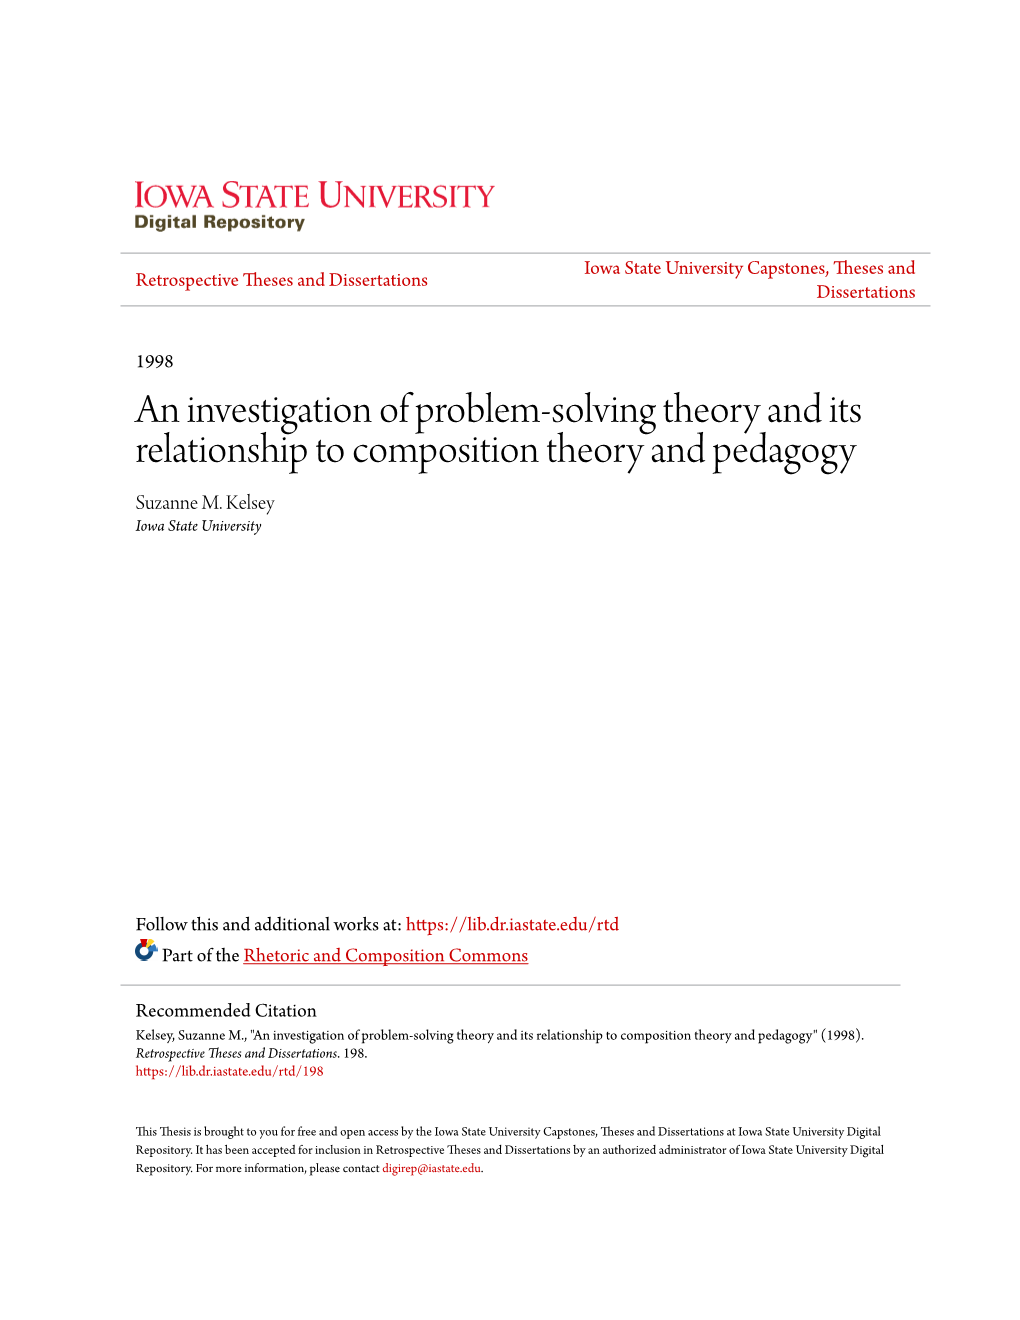 An Investigation of Problem-Solving Theory and Its Relationship to Composition Theory and Pedagogy Suzanne M